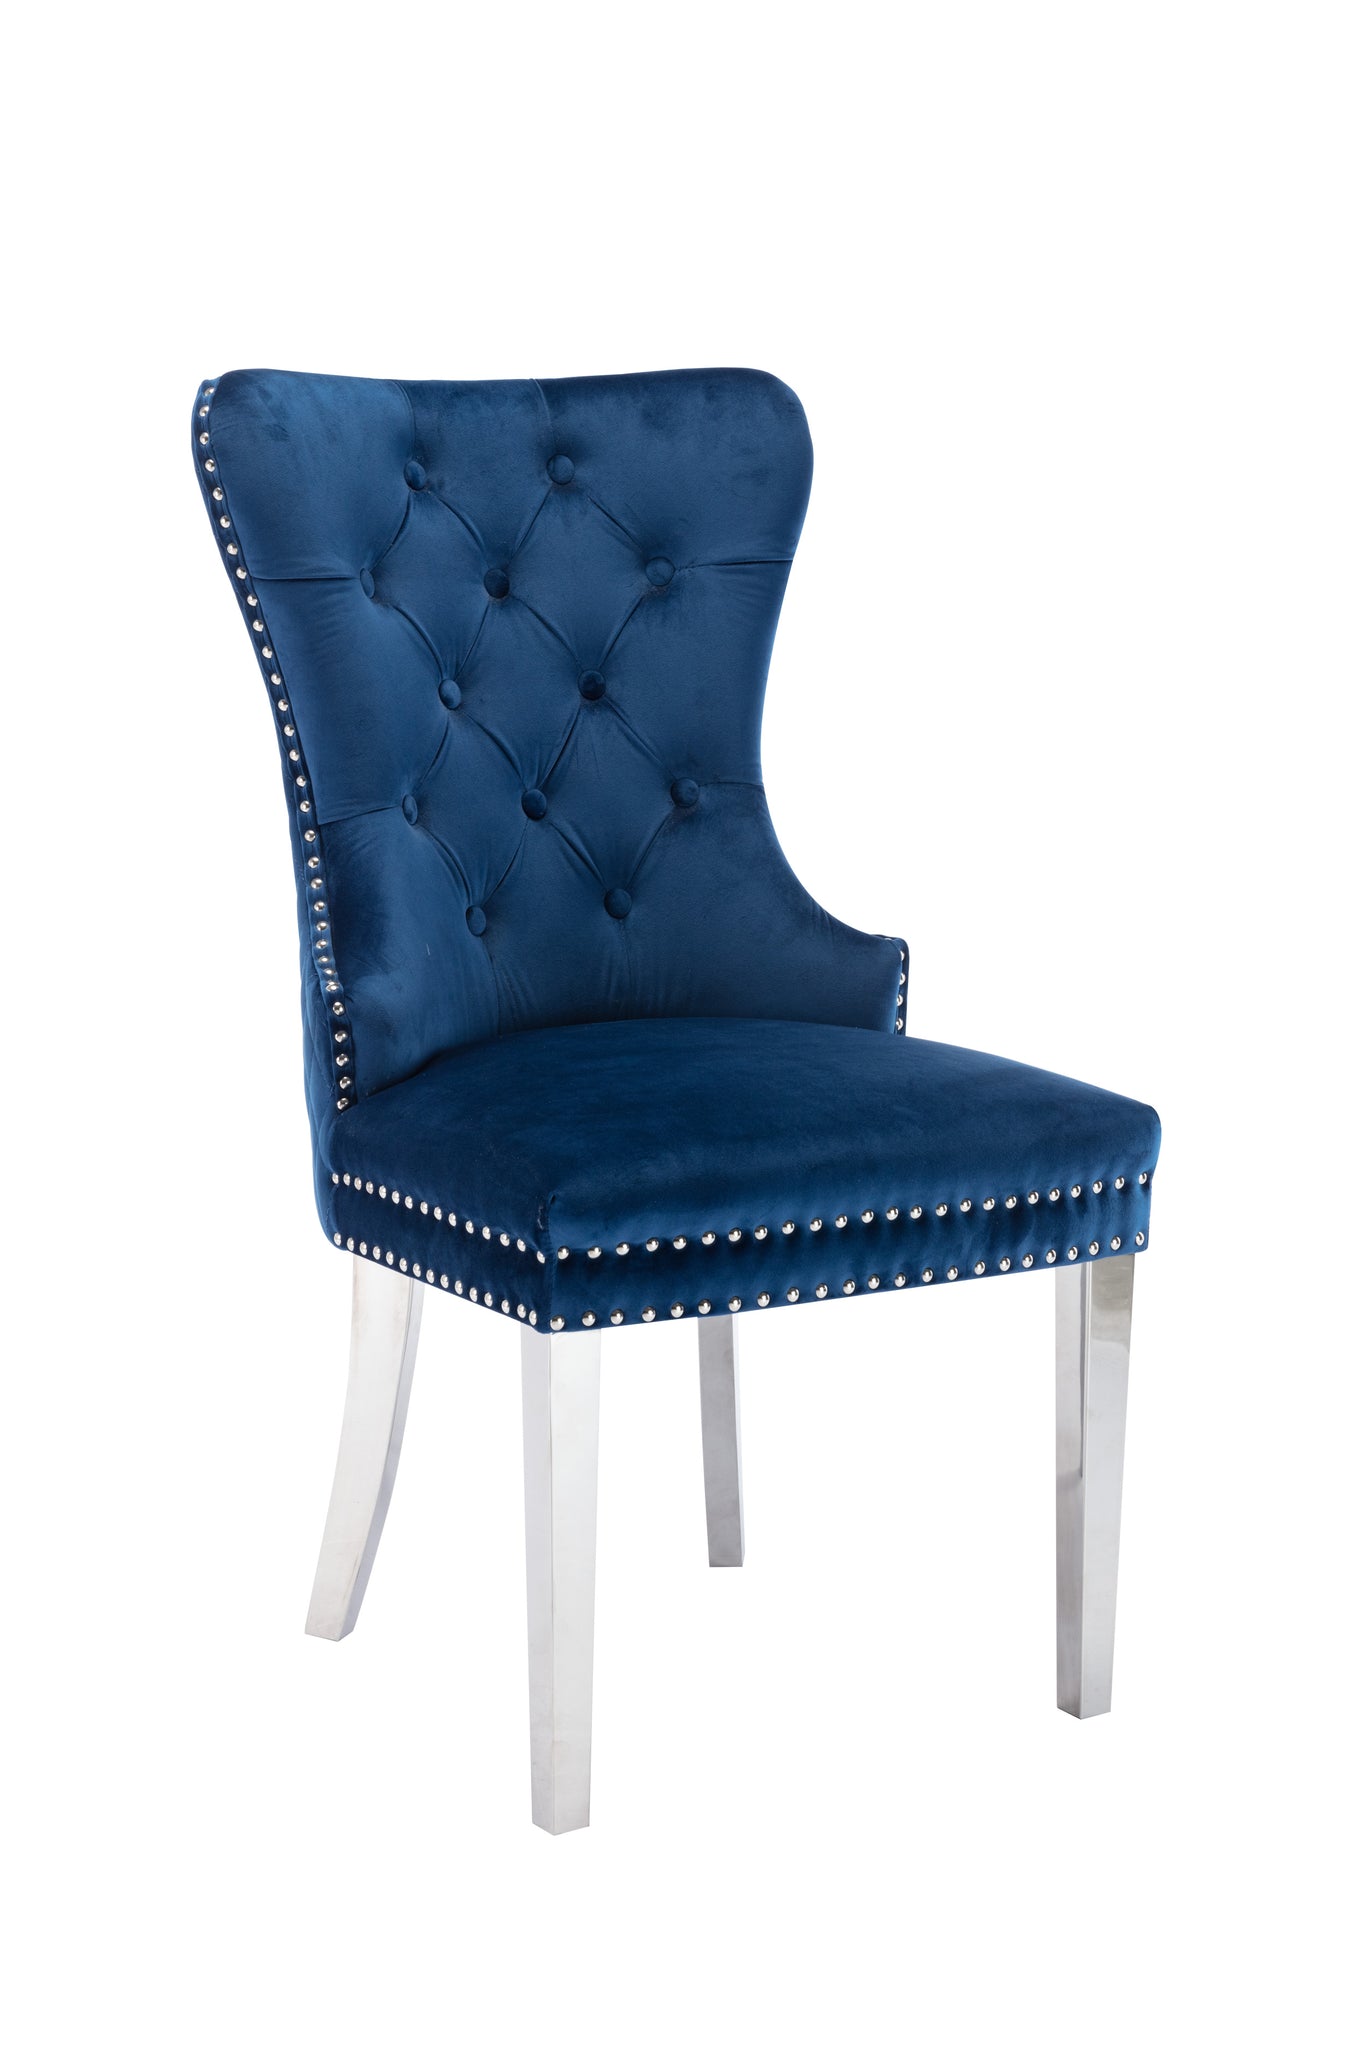 Simba Stainless Steel 2 Piece Chair Finish with Velvet blue-dining room-contemporary-modern-accent